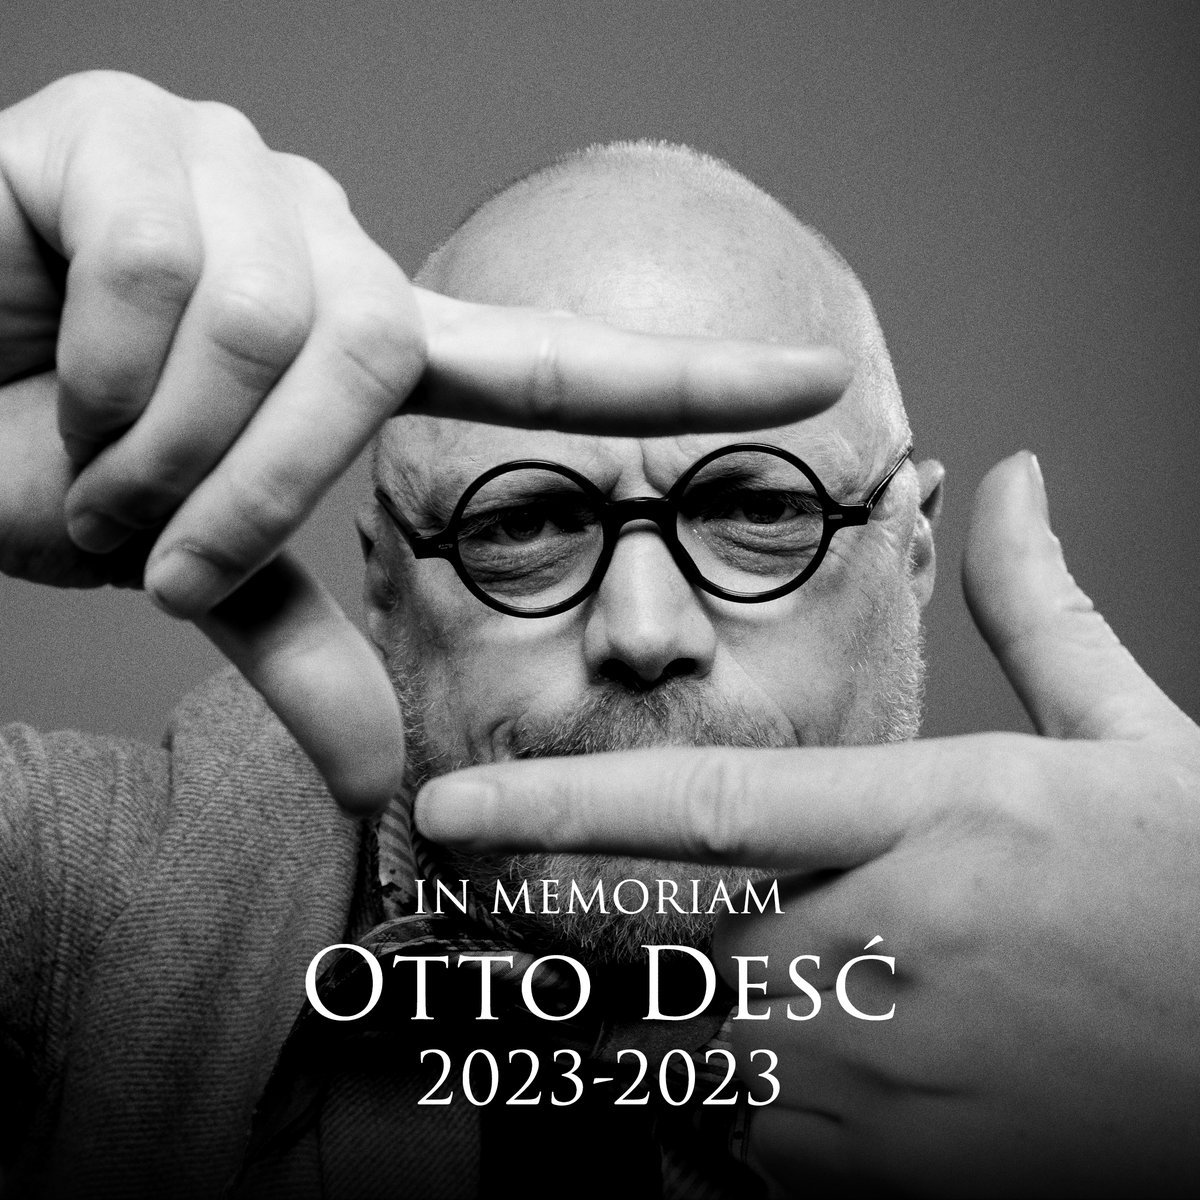 It was pun while it lasted. Thanks to #Oscar Nominee Swen Gillberg for being our Otto.